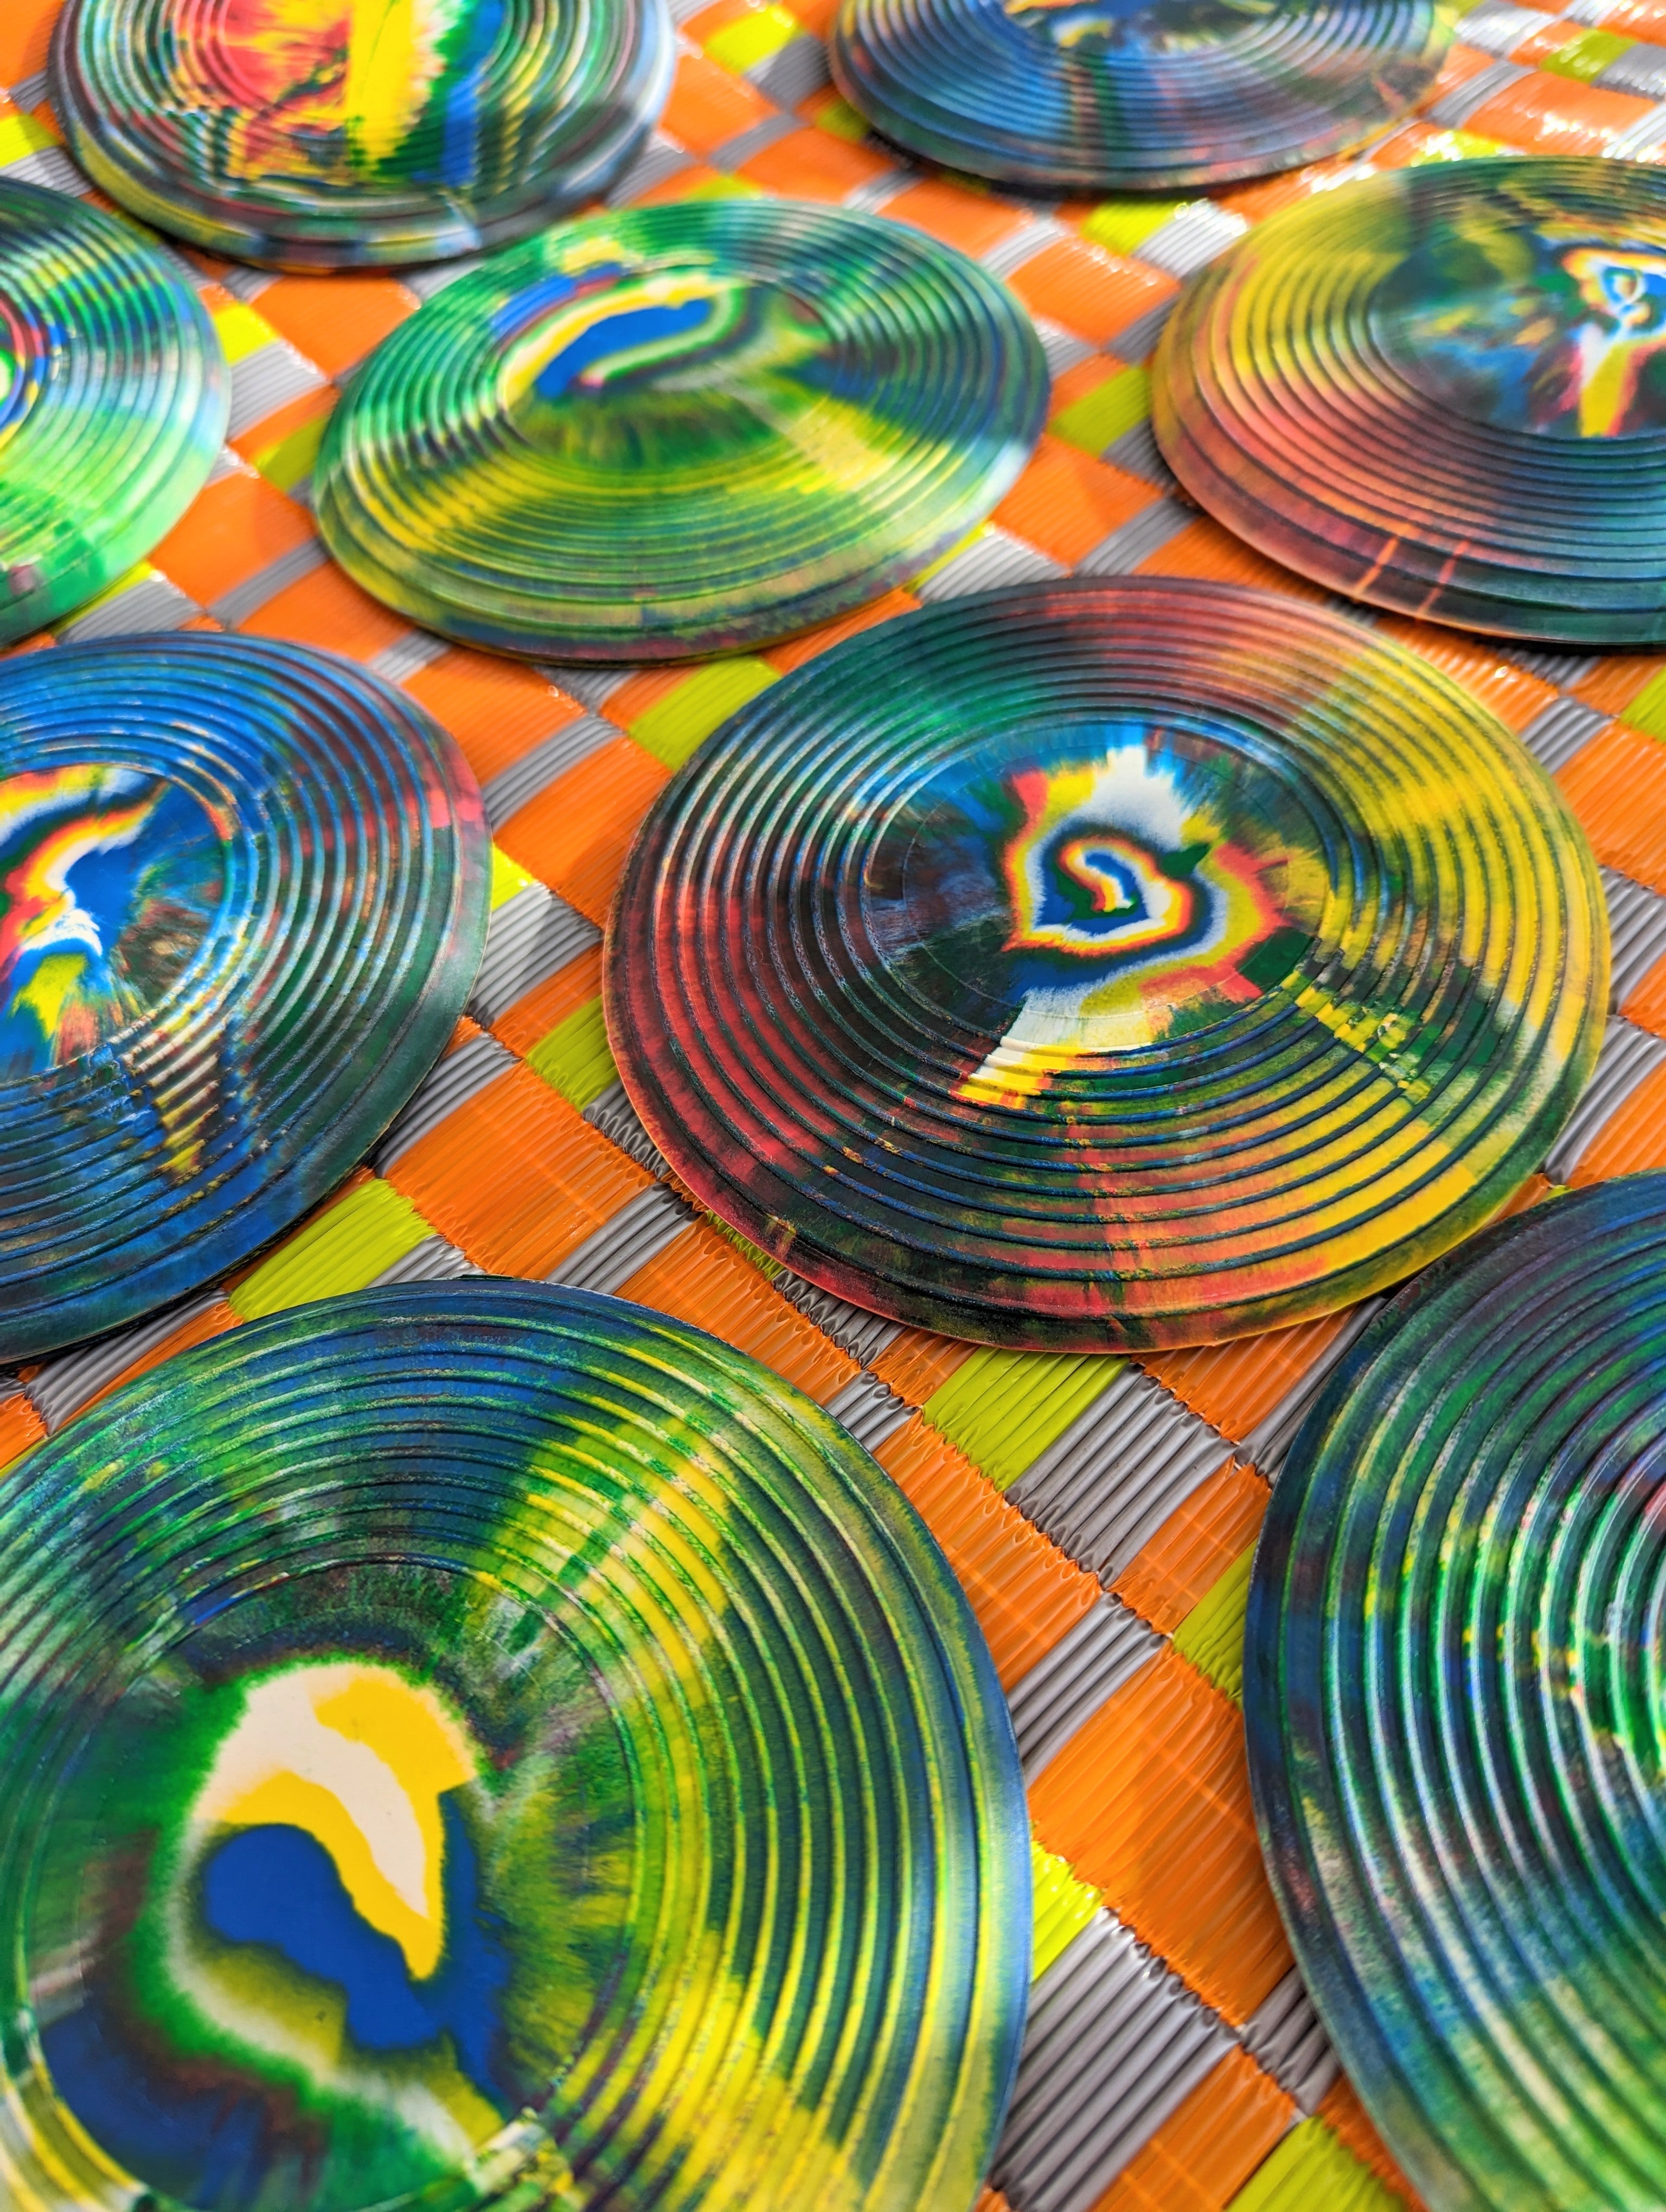 These pure natural rubber marbled frisbees are just gorgeous!! Made in the same way since the 1960s!!

We thought that they would make fabulous coasters too!

13cm X 13 cm

Rubber

Designs vary due to the way these are made.

